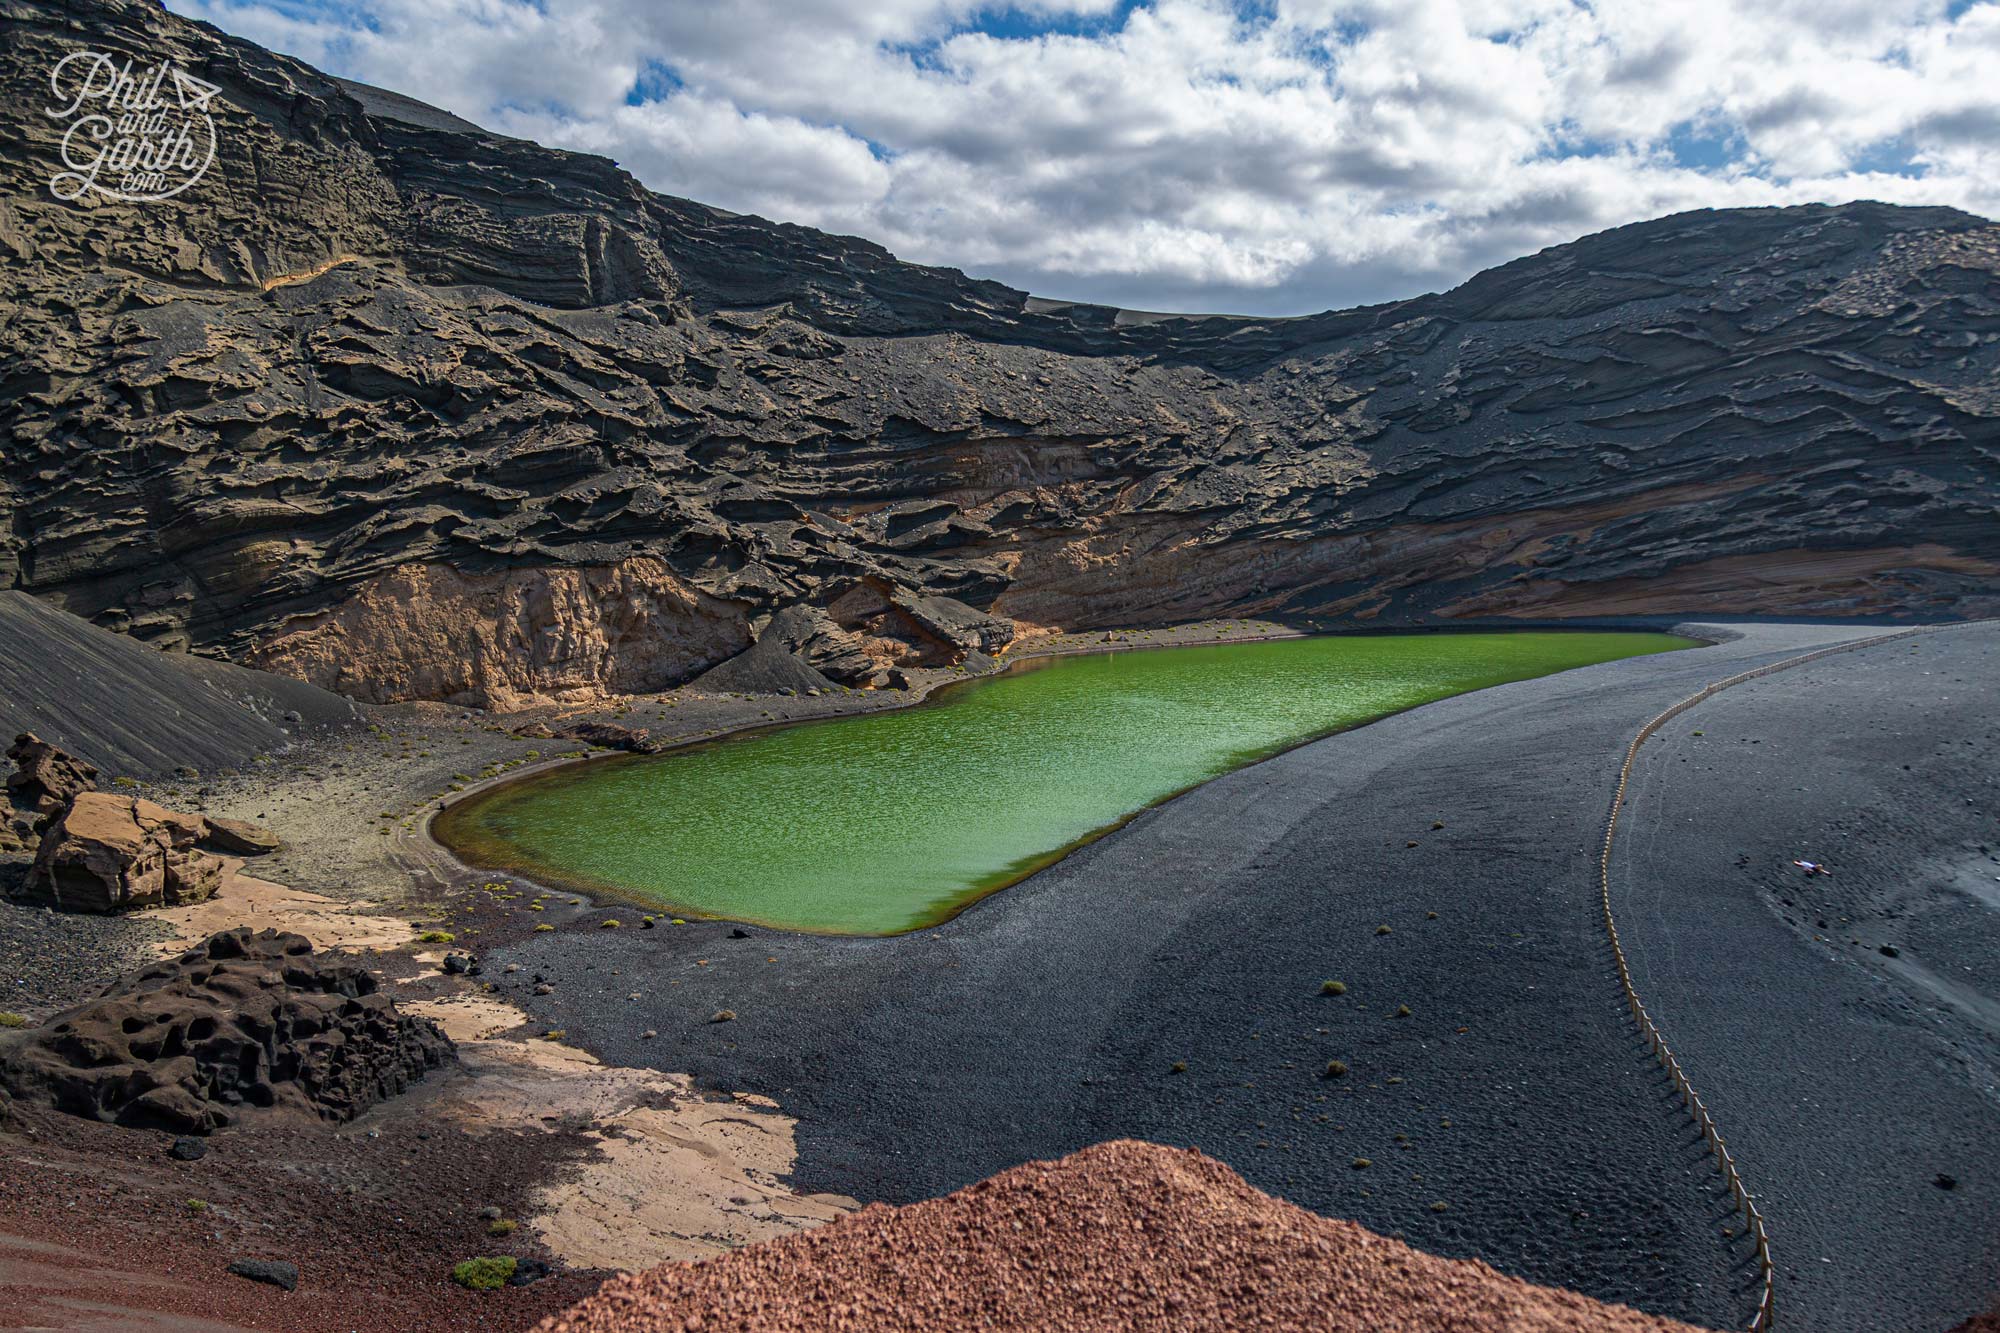 The striking El Golfo green lagoon is a crater from an extinct volcano